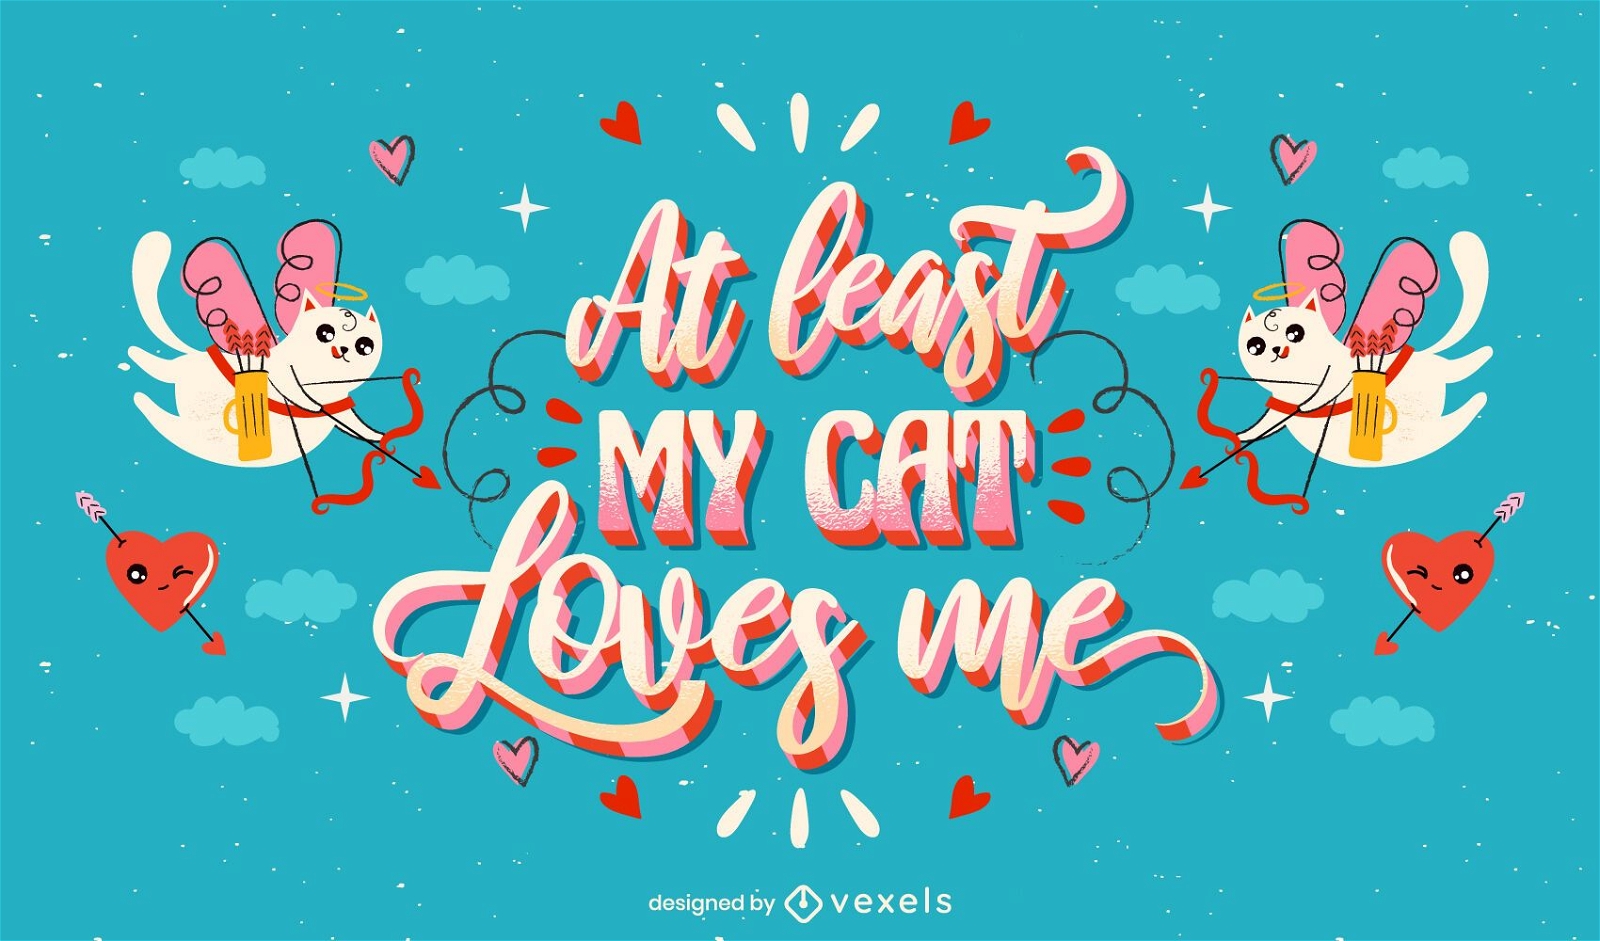 Cupid cats anti valentine's day lettering design